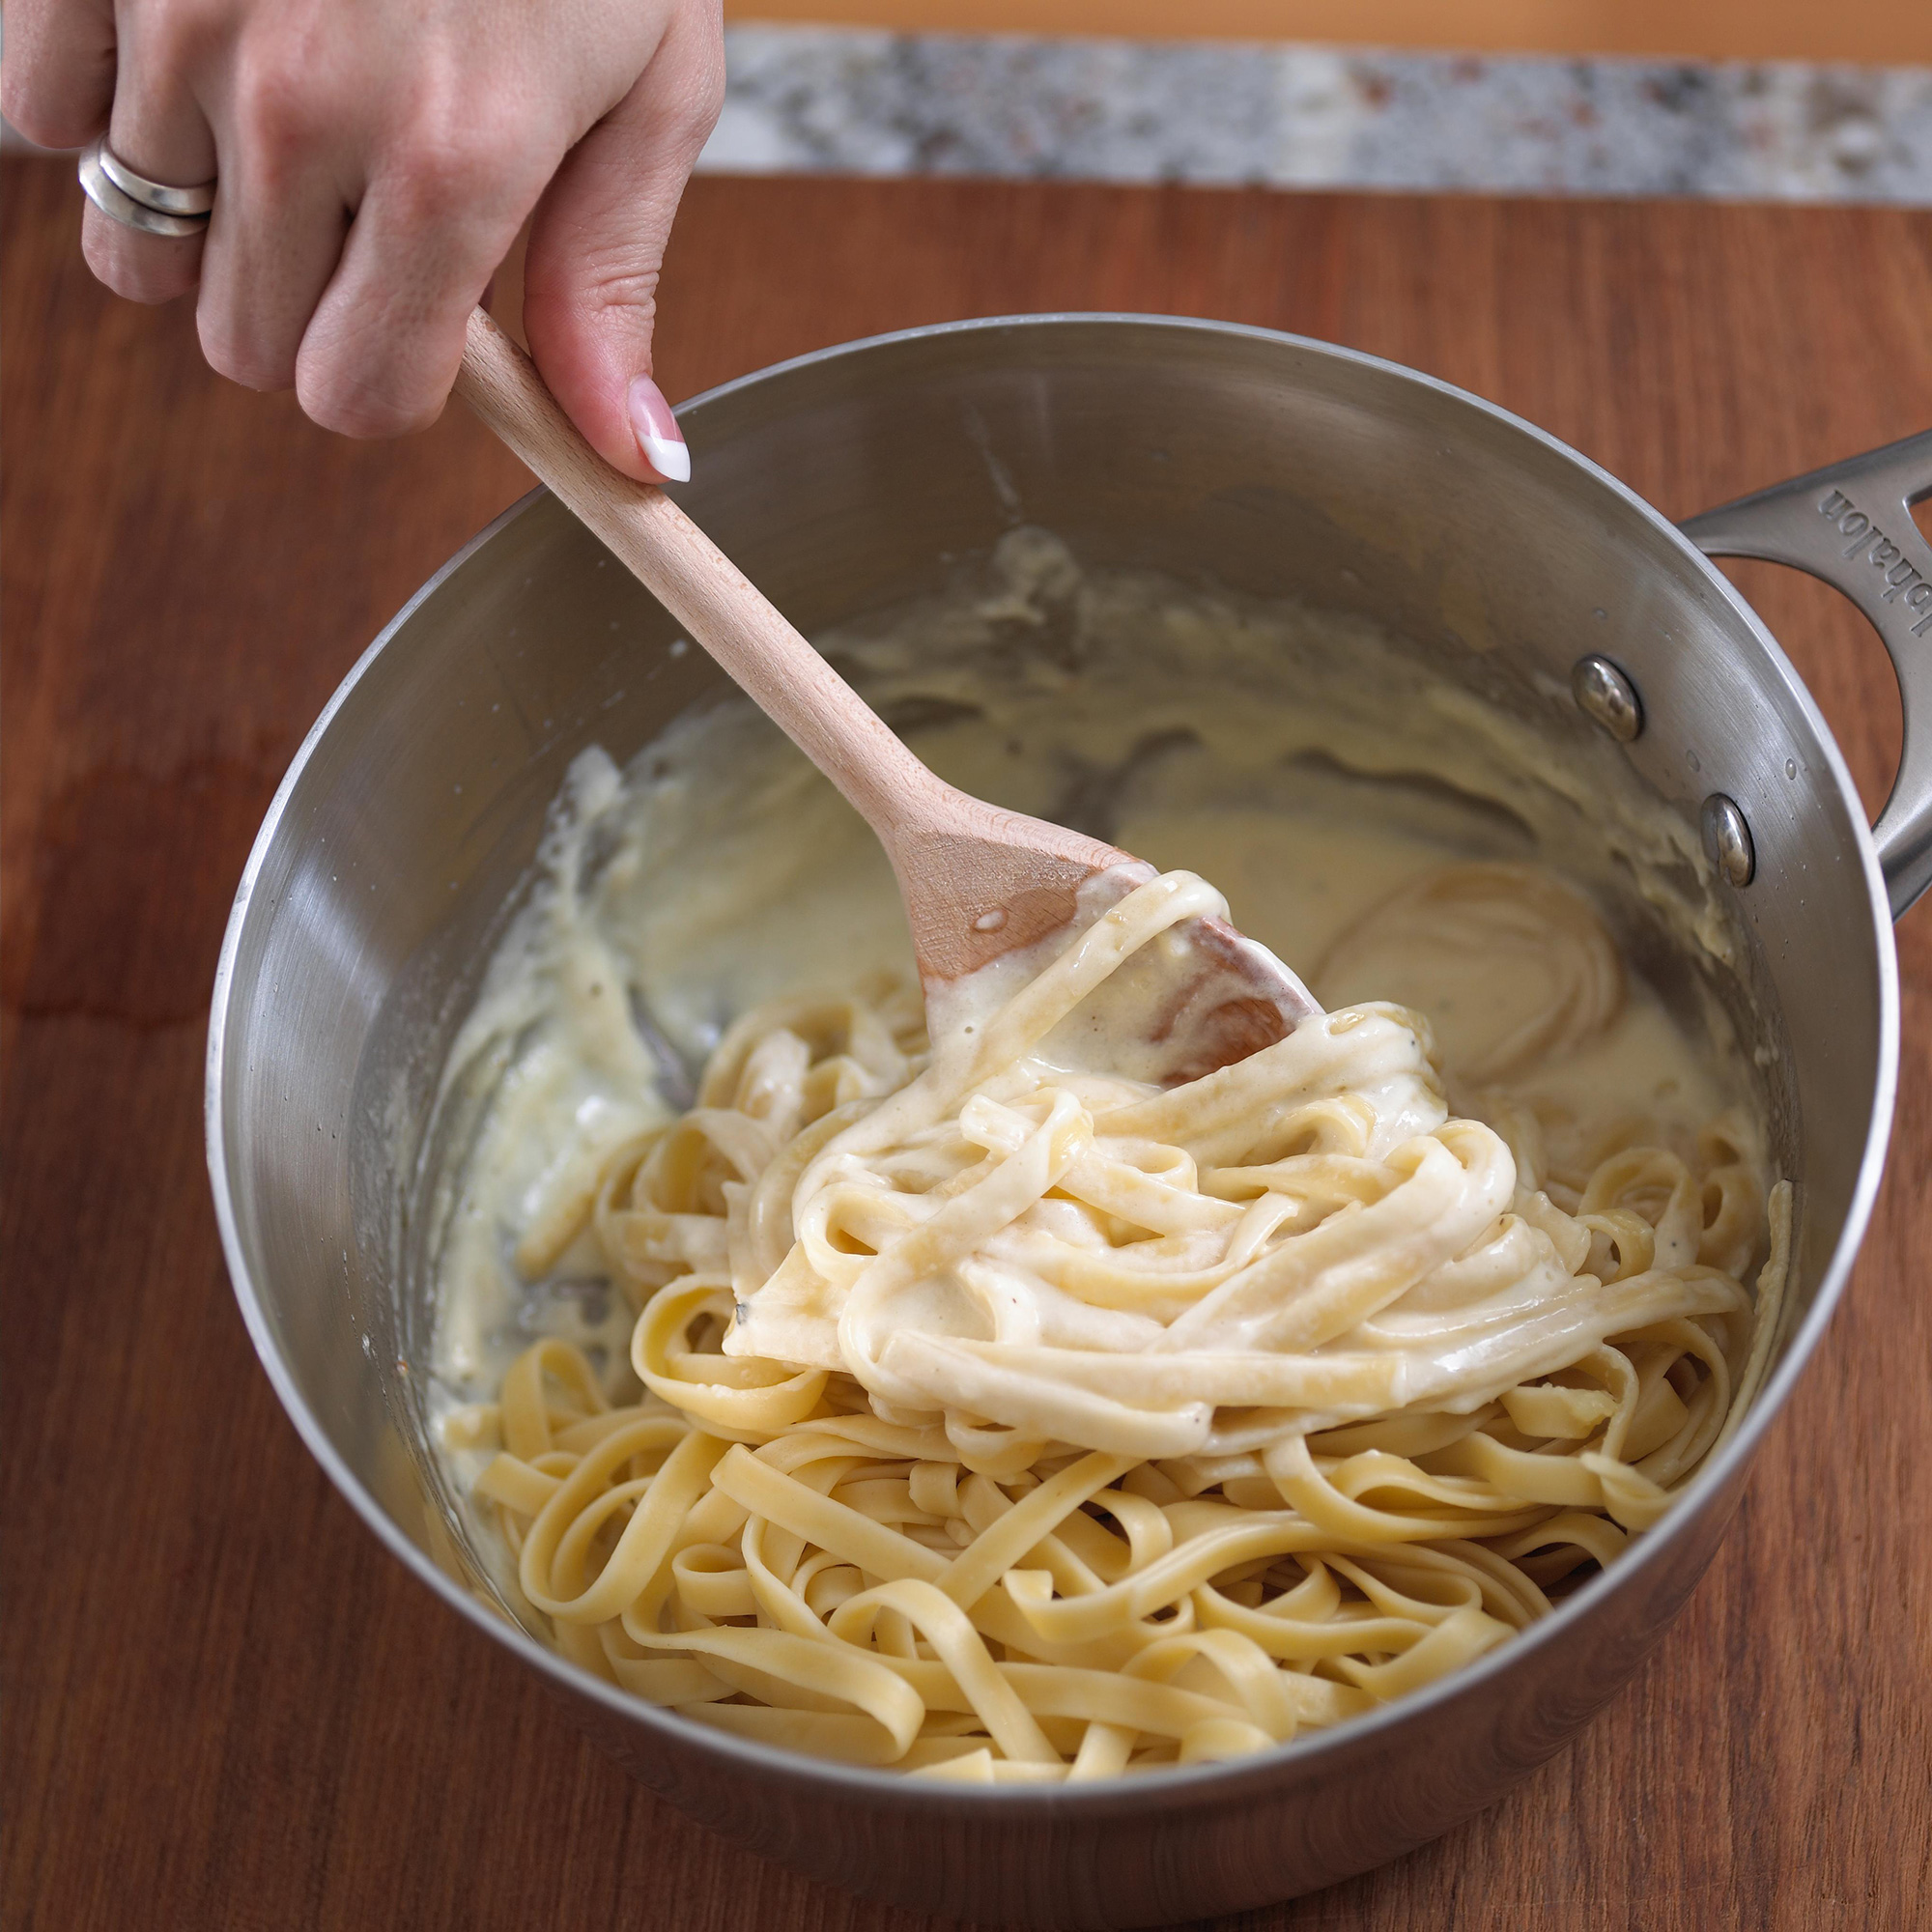 How to Make Alfredo Sauce from Scratch